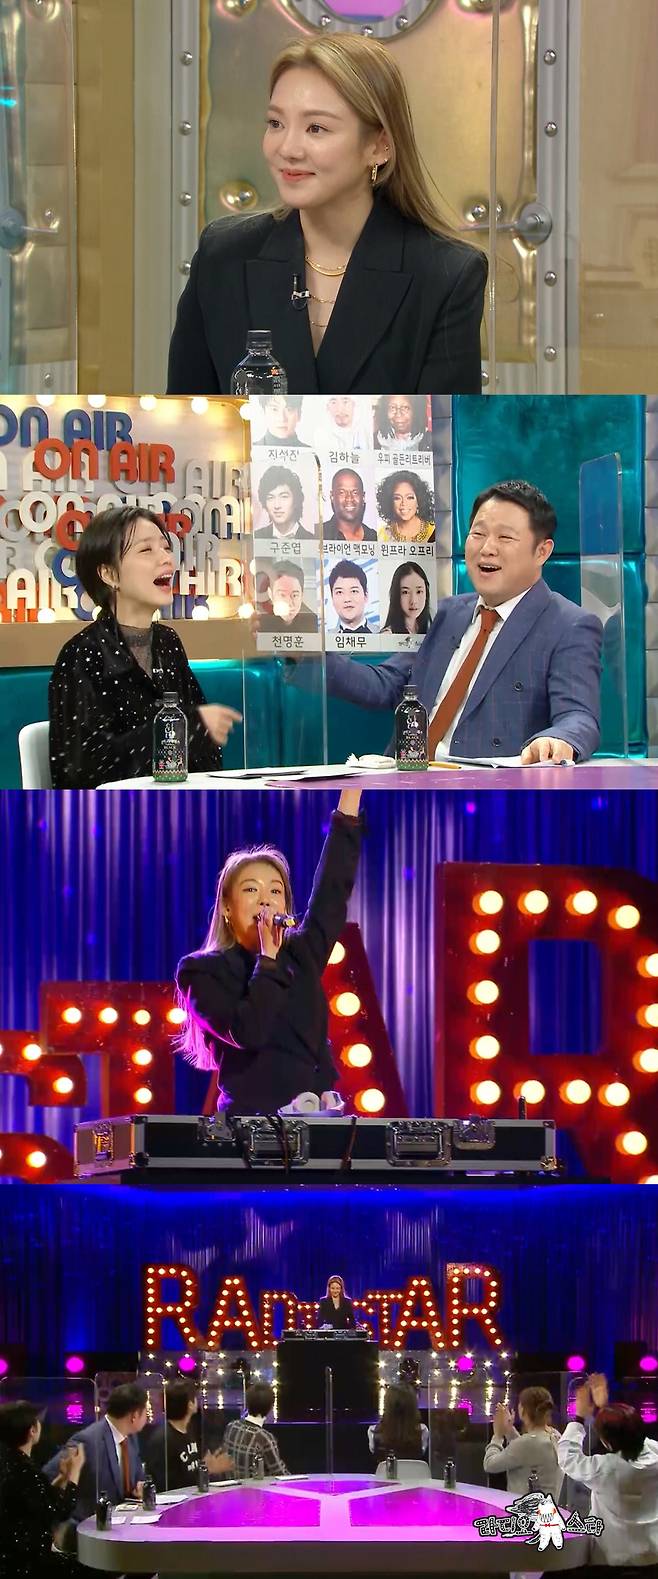 Girls Generation Hyoyeon will take a long-term SMS to SM Entertainment Lee Soo-man, chairman of the agency, saying, I wanted to move from Radio Star to DJ.MBC Radio Star, a high-quality talk show scheduled to be broadcasted at 10:20 pm today (27th), is featured in Red Taste ~ Wonder Sister with Kang Joo-eun, Kim So-yeon, Girls Generation Hyoyeon and Aiki.Hyoyeon, who was in front of the public under another name, DJ HYO, after the name front letter, says he was active all over the world until Corona 19 spread.In particular, Hyoyeon said, I wanted to work as a DJ. It was said that SM Entertainment Lee Soo-man and his employees were surprised to learn that they had delivered a long SMS.Special MC Yunho, who listened to the story of Hyoyeon, was a witness and said, I heard that Hyoyeon is sincere in DJ.Hyoyeon tells the story of the DJing event in the aftermath of Corona 19, starting with the mistake he experienced while working as DJ.Above all, Hyoyeon explains that other DJs use to mix the curses when inducing the excitement of the audience. It was Girls Generation ~ I practice to swear in the mirror these days.Hyoyeon, who has been generous about DJing, will show off his performance to make his shoulders shake in line with the Girls Generation hit song for Radio Star viewers.In addition, Hyoyeon unveils an inverted mild-tasting past episode that is a kick-off with DiJihyo ().Kim Gu seems fascinated by the charm of Hyoyeon and the passion of his other name DJ HYO: Do you write the filial piety ()?DJ is good, he said, transforming into a fan mode in the first row of the room.In addition, Hyoyeon announces plans for Girls Generation team activities and reveals aspirations for future activities.In particular, Hyoyeon, who was a strong team member, said that he had conceived an exchange expedition connecting the refund expedition, and after four spicy combinations, he said, I am the most innocent of them.The story of Girls Generation Hyoyeon, which is sincere in DJing, can be found today (27th) on Radio Star, which airs at 10:20 pm on Wednesday night.